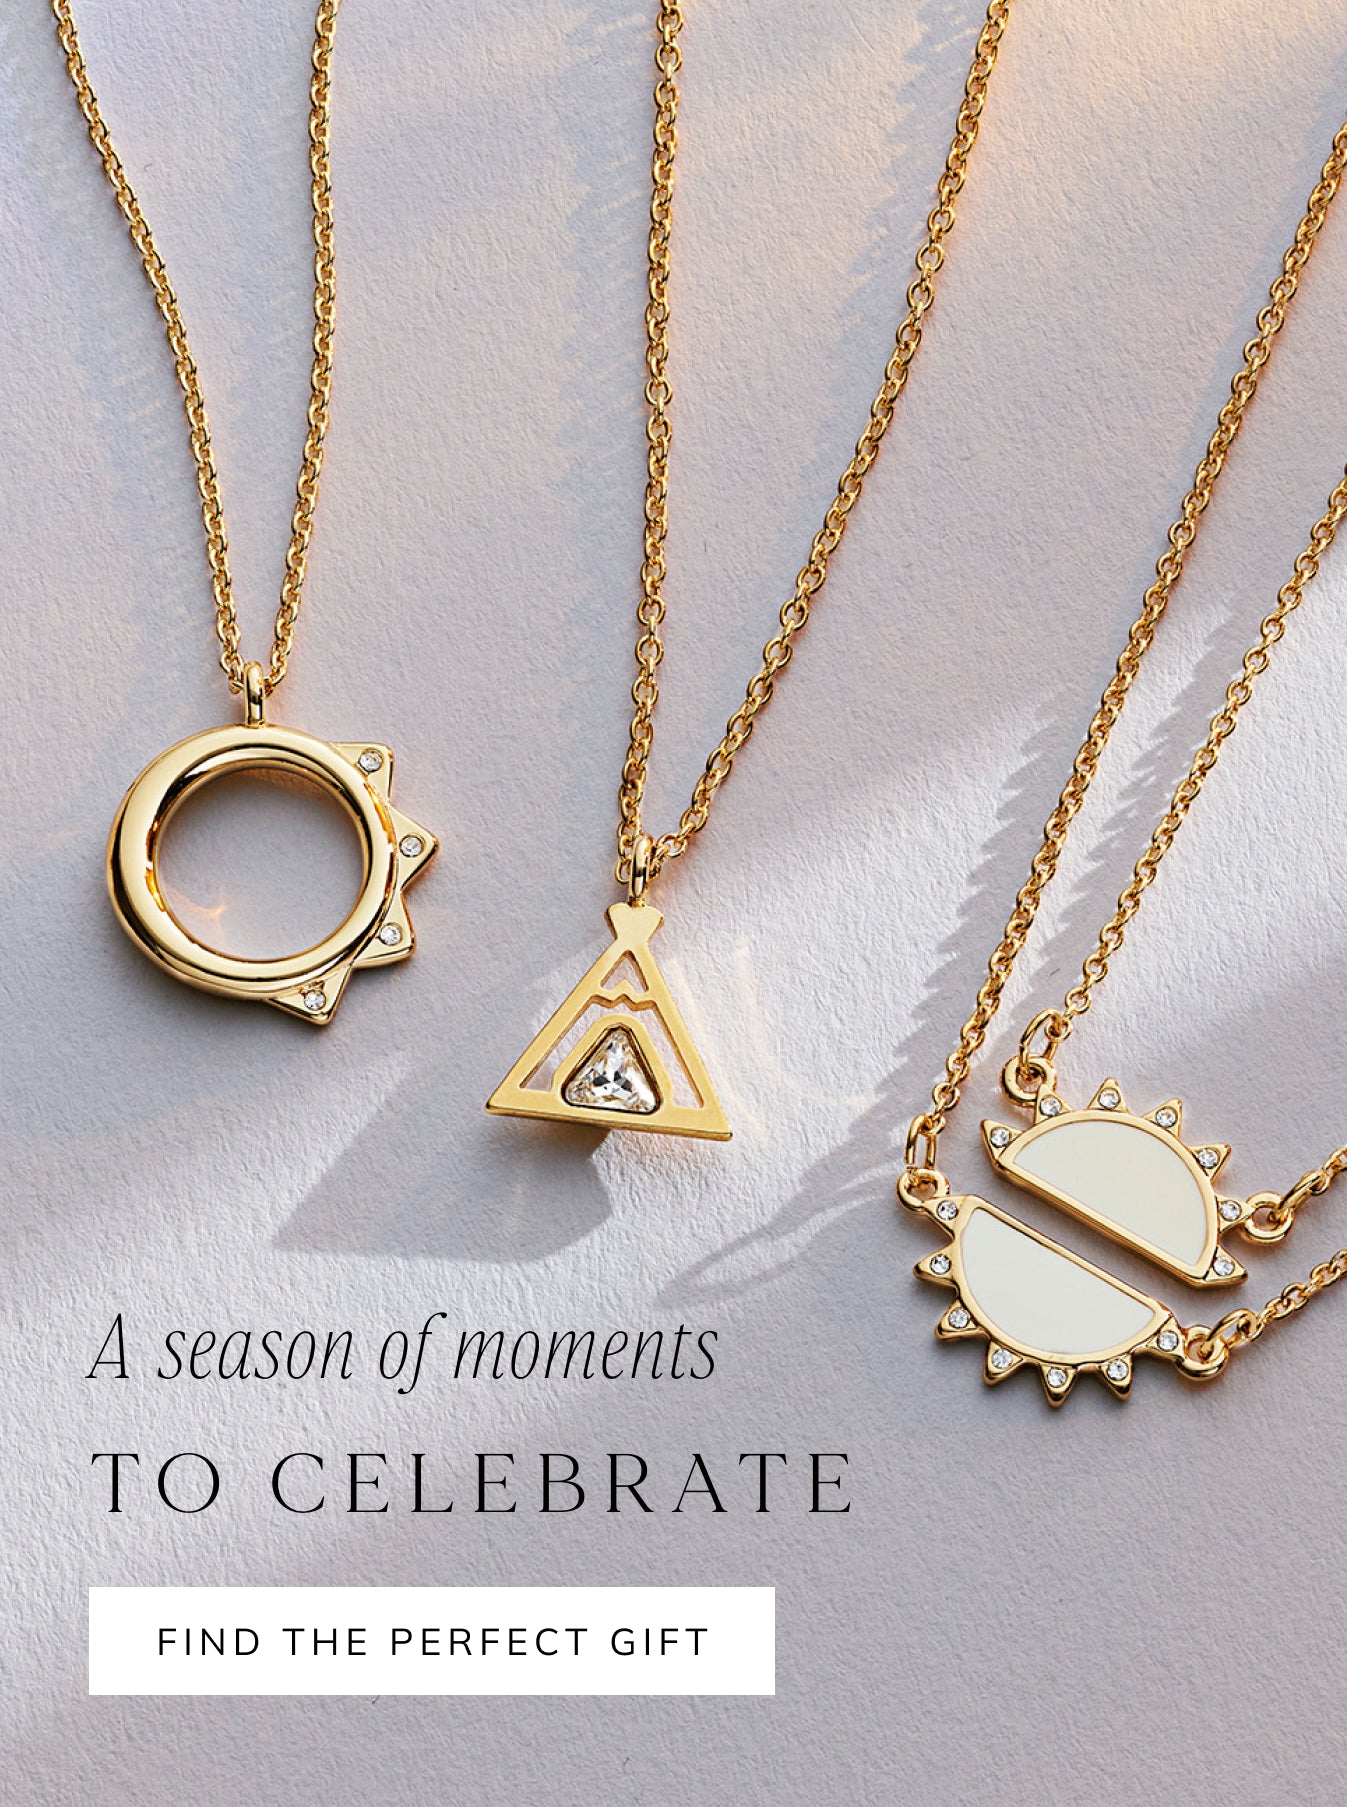 A seasons of Moments to Celebrate banner. [Find the Perfect Gift]